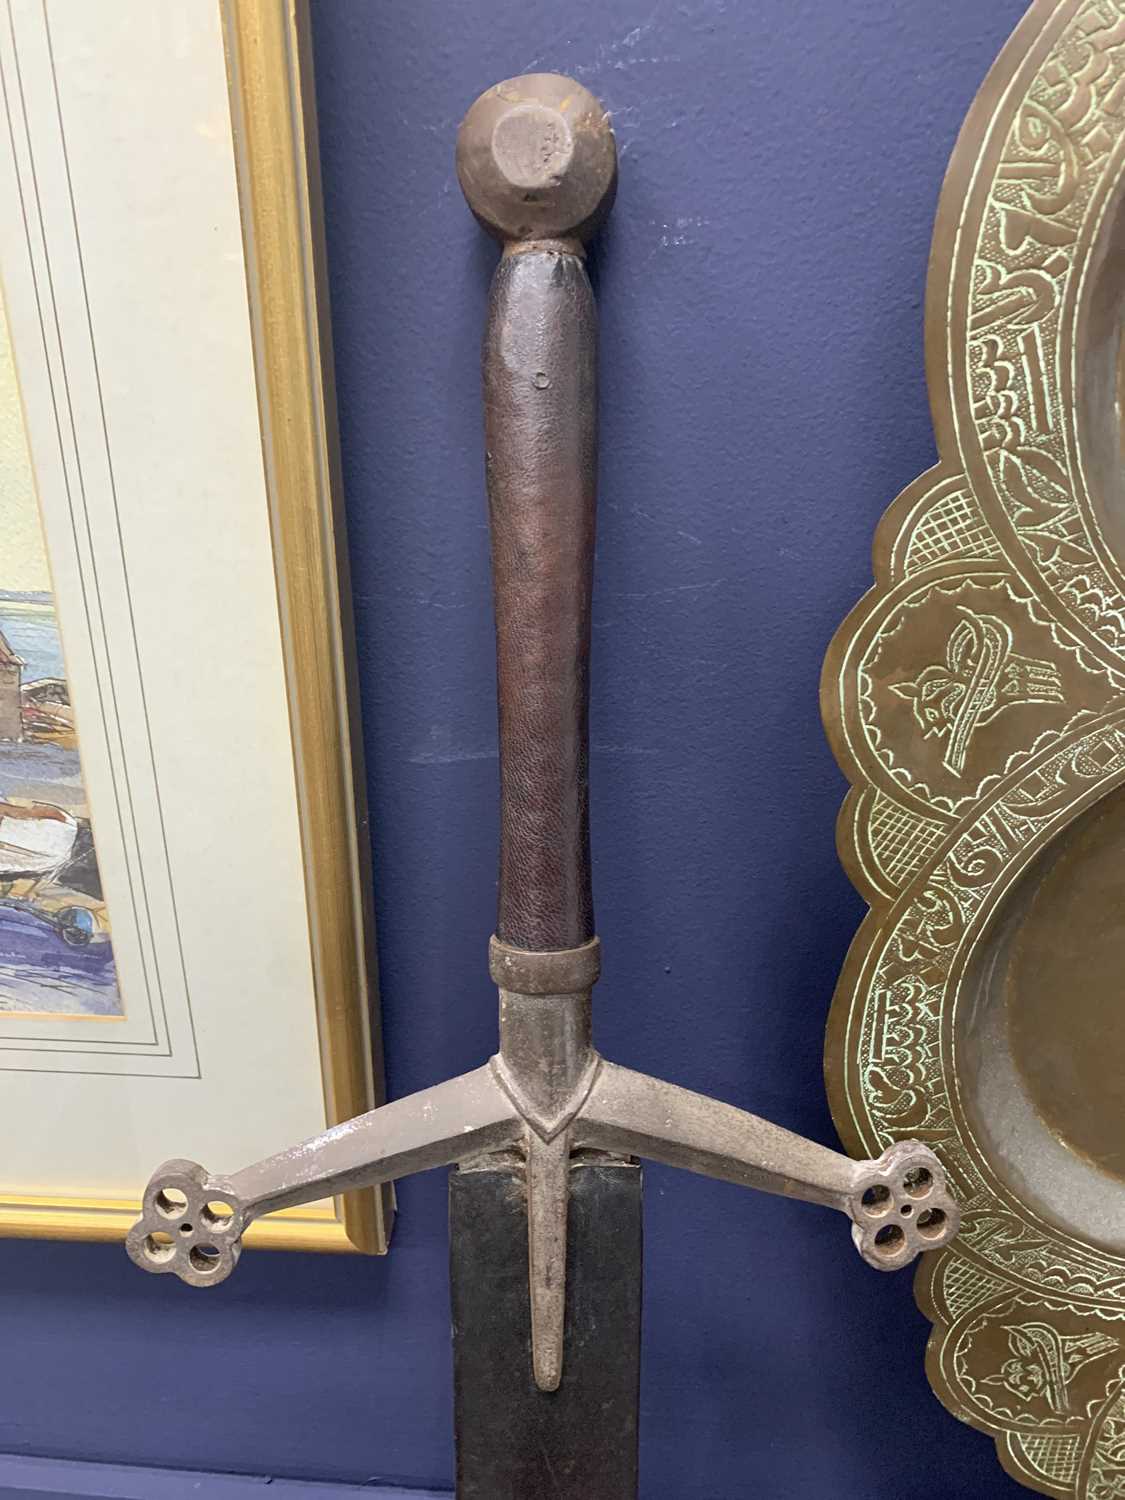 SCOTTISH CLAYMORE SWORD, ALONG WITH A LEATHER BUCKLER SHIELD - Image 6 of 9